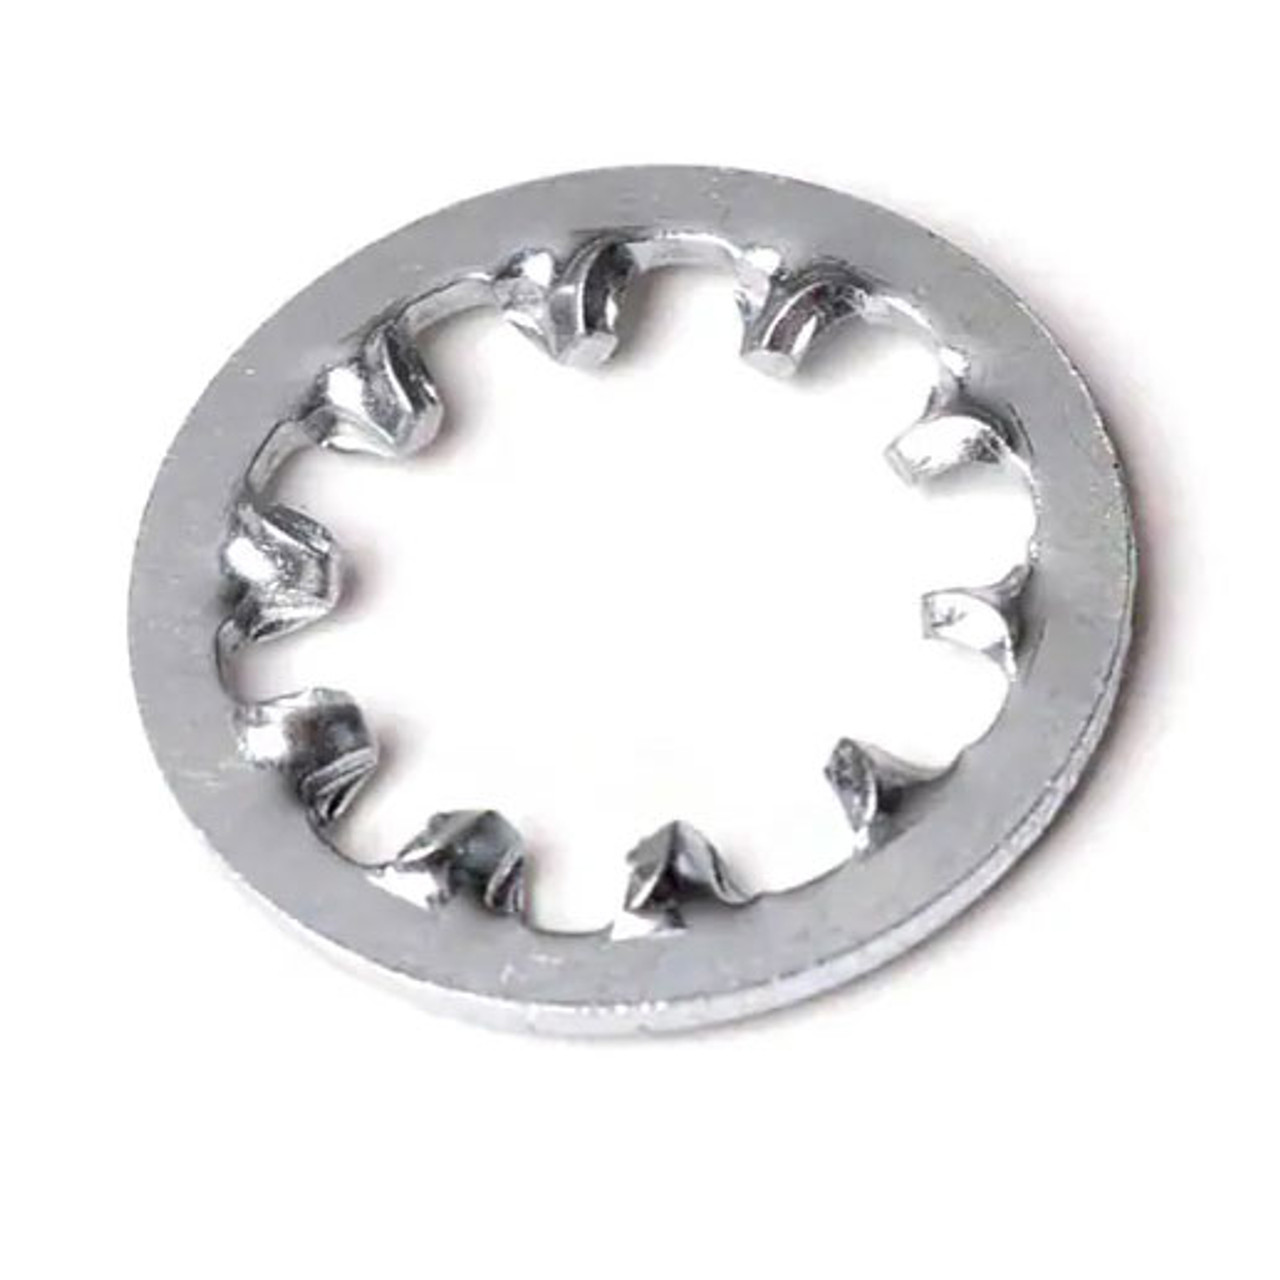 M5 (3/16") Internal Tooth Lock Washer Stainless 304 : Qty 500